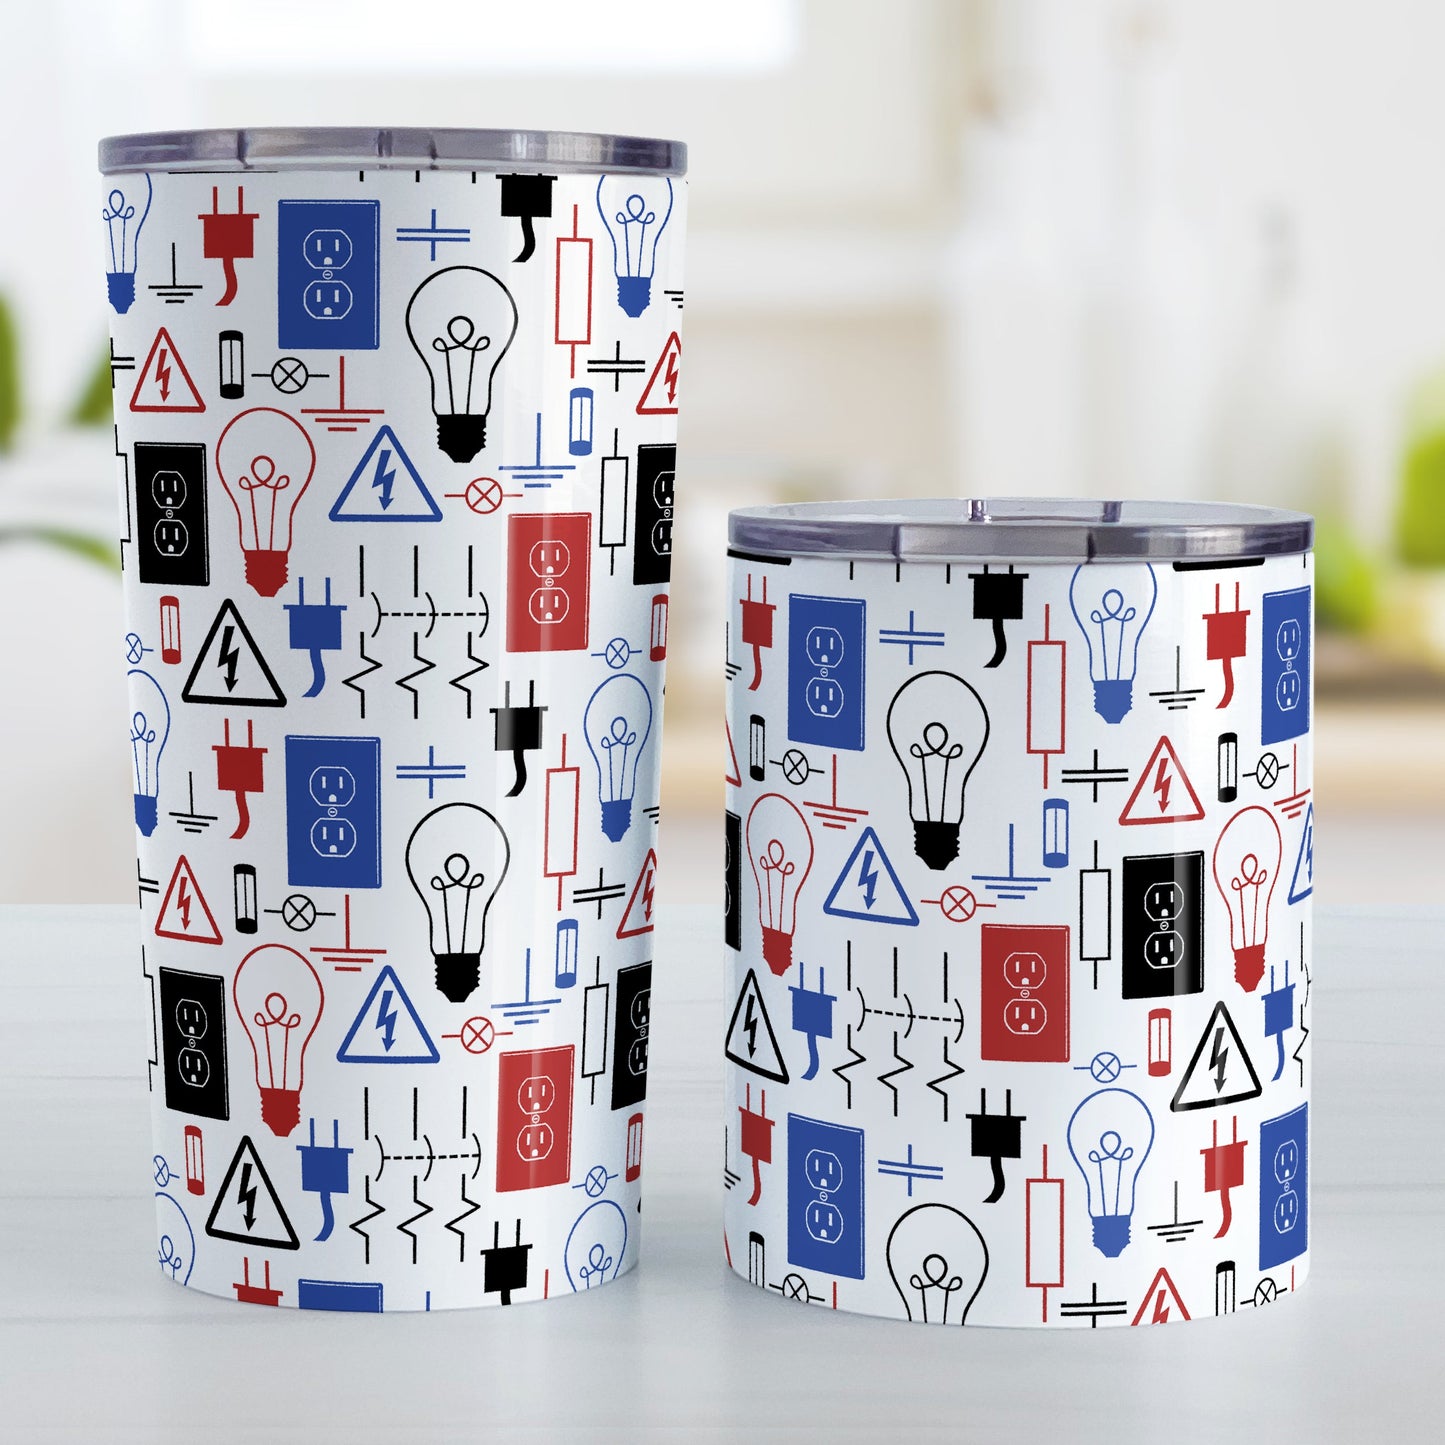 Red Blue Electrical Electrician Tumbler Cup (20oz and 10oz) at Amy's Coffee Mugs. Stainless steel insulated tumbler cups designed with an electrical pattern with light bulbs, wall sockets, plugs, fuses, and other electricity symbols in red, blue, and black colors that wraps around the cups. These cups are perfect for people who work a trade as an electrician, love working with electronics, and working in electrical engineering. Photo shows both sized cups next to each other. 